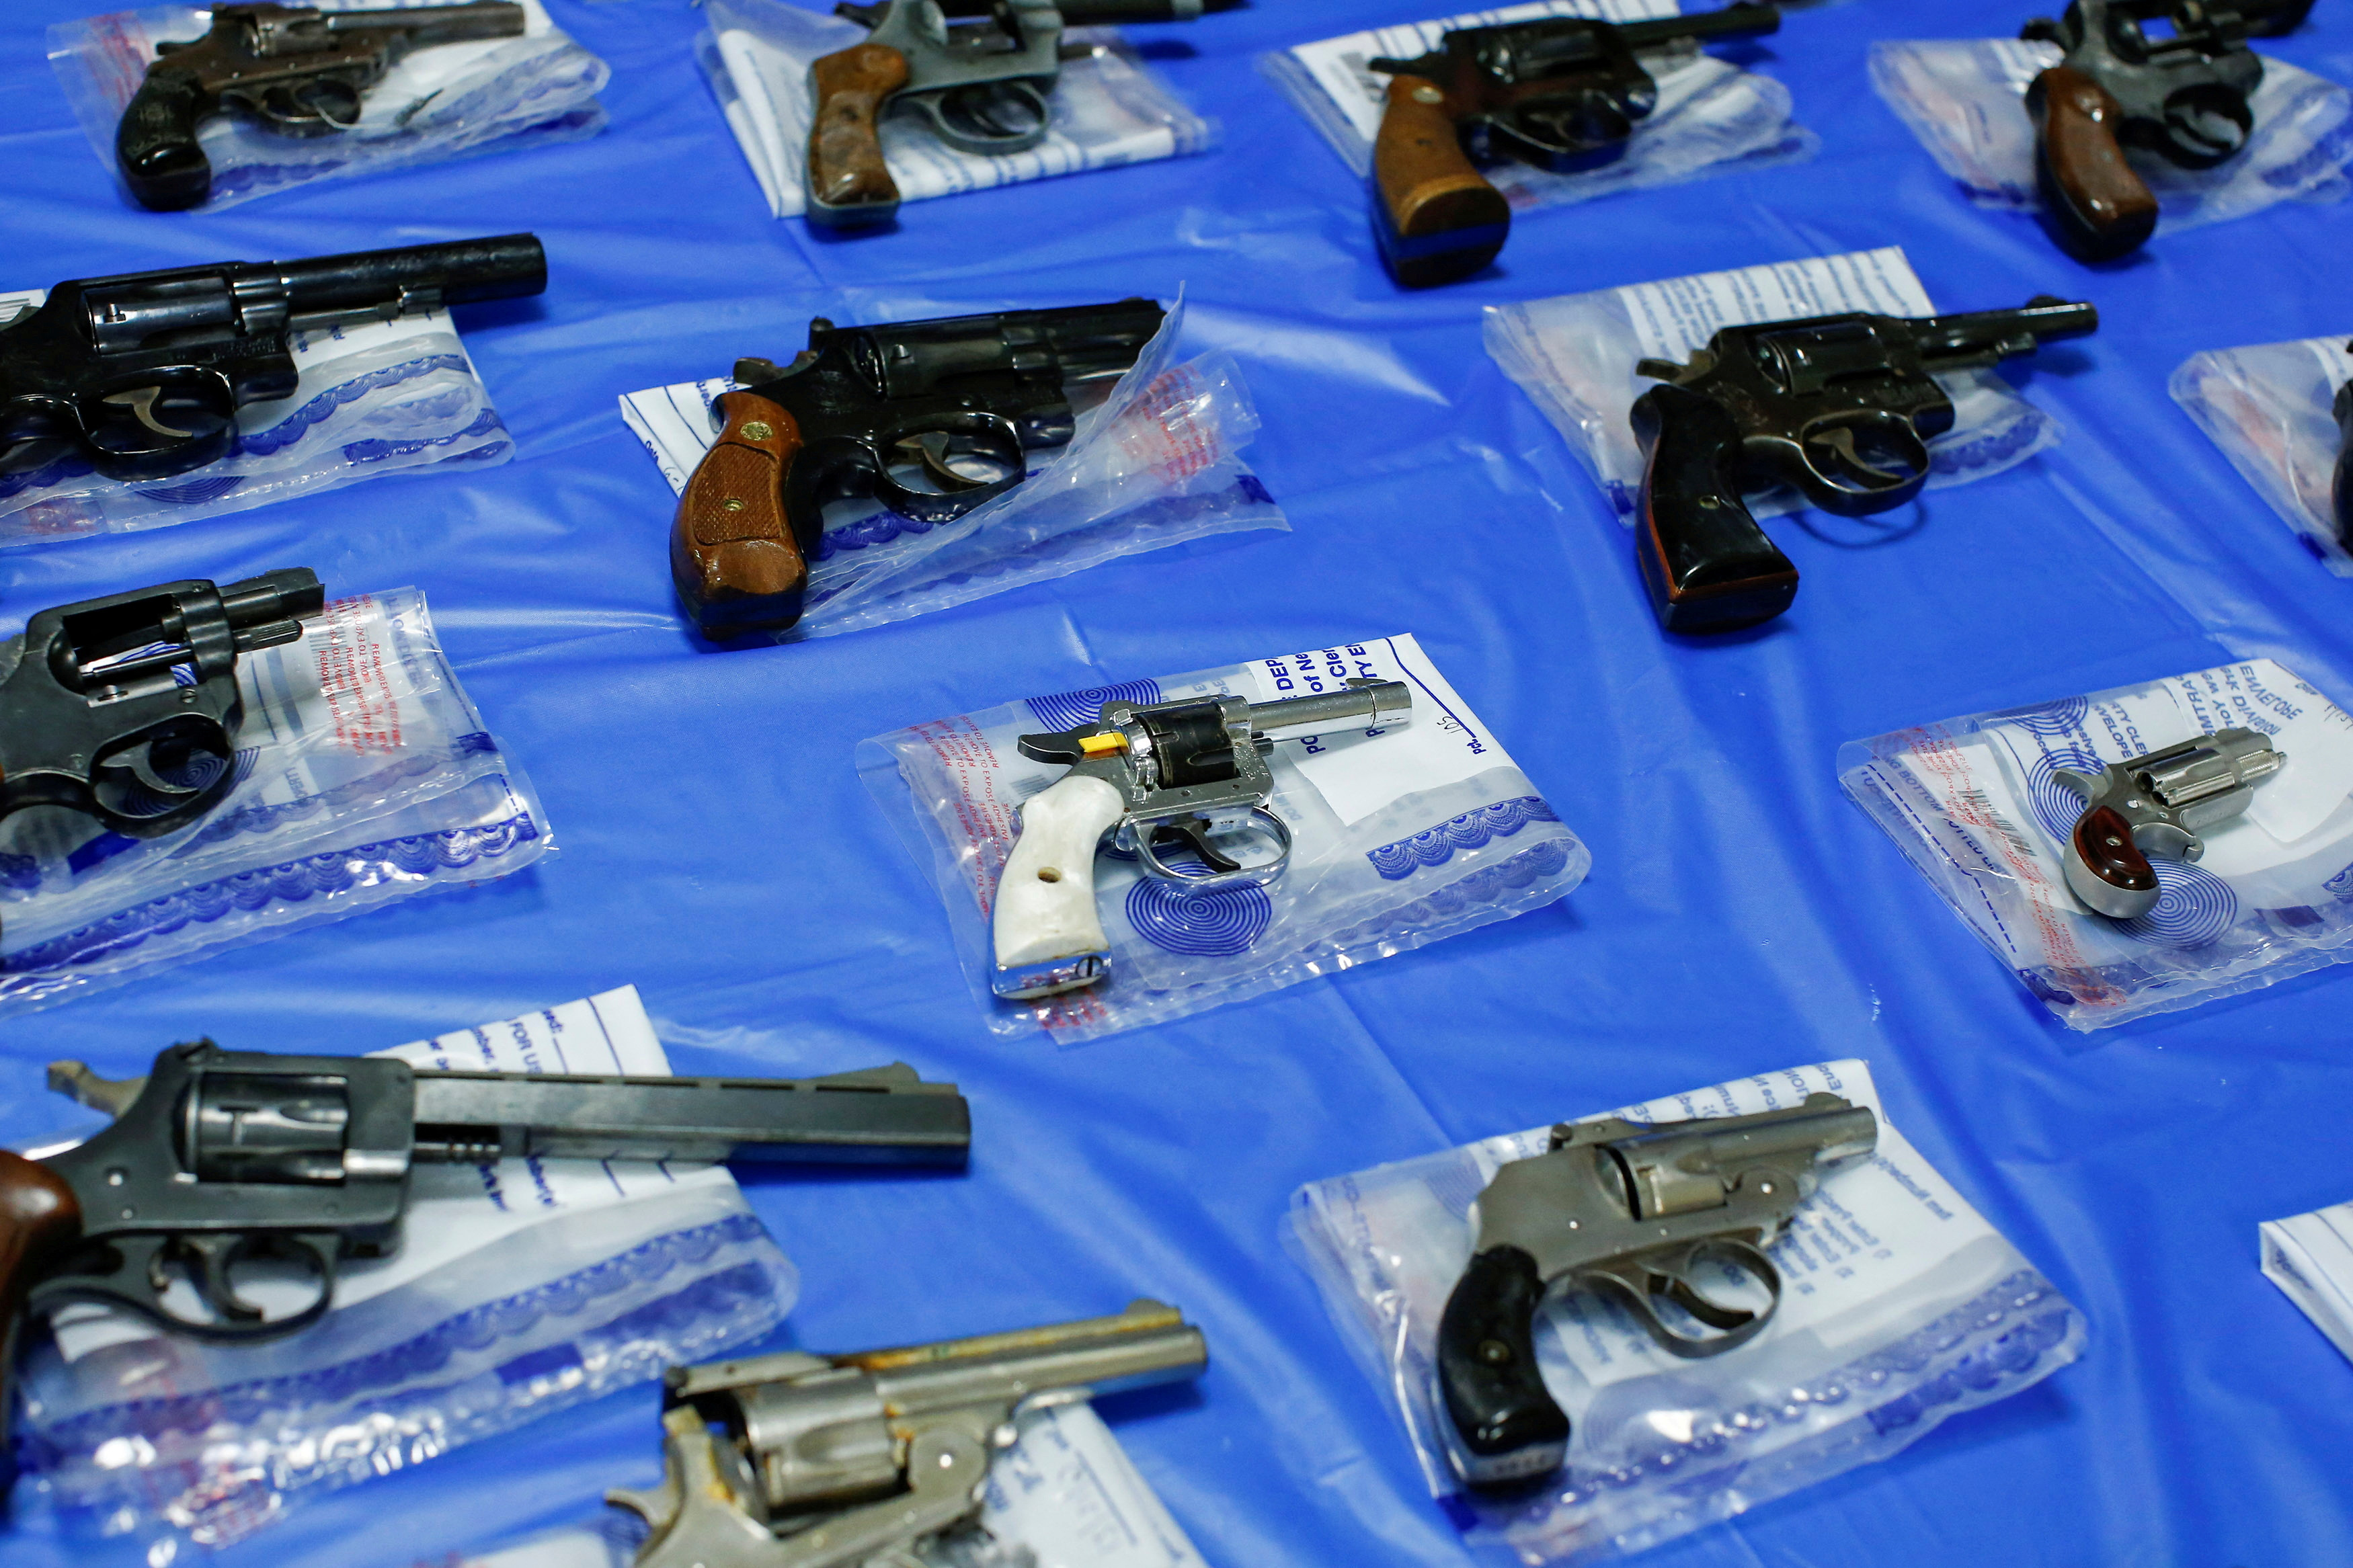 Guns are displayed after a gun buyback event organized by the NYPD, in the Queens borough of New York City